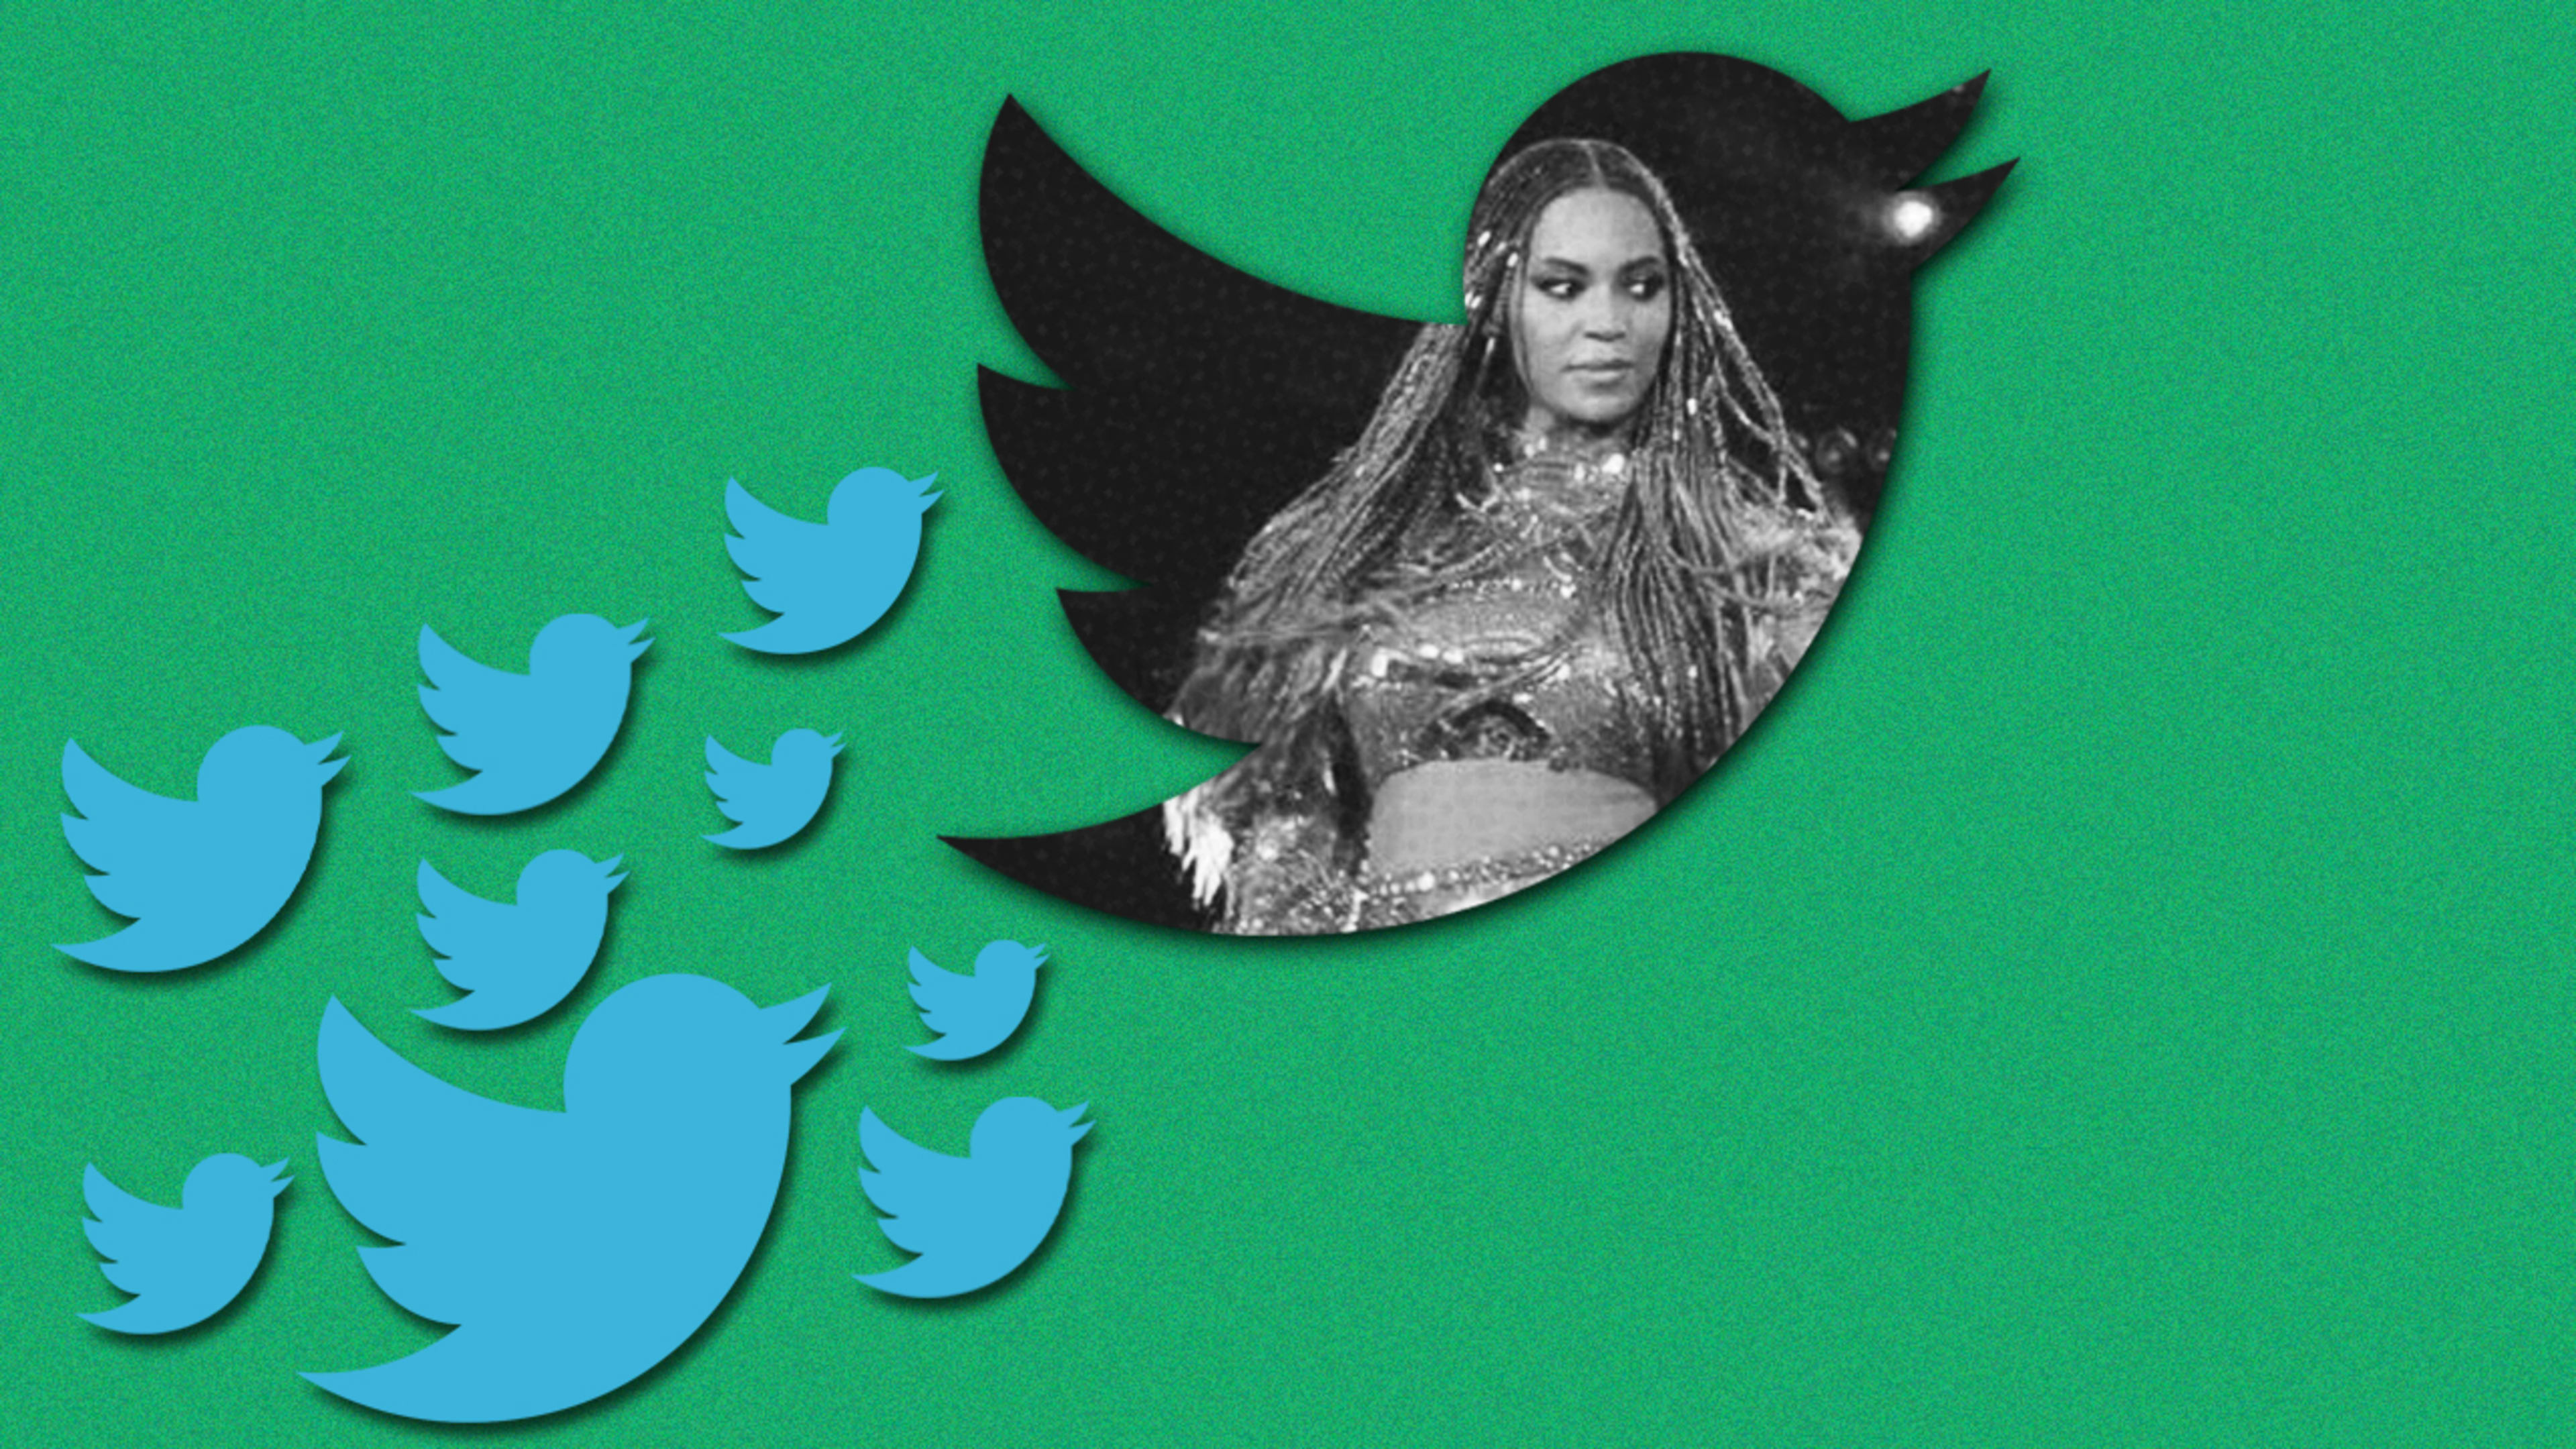 Twitter contractors reportedly used internal tools to spy on celebrities, including Beyoncé